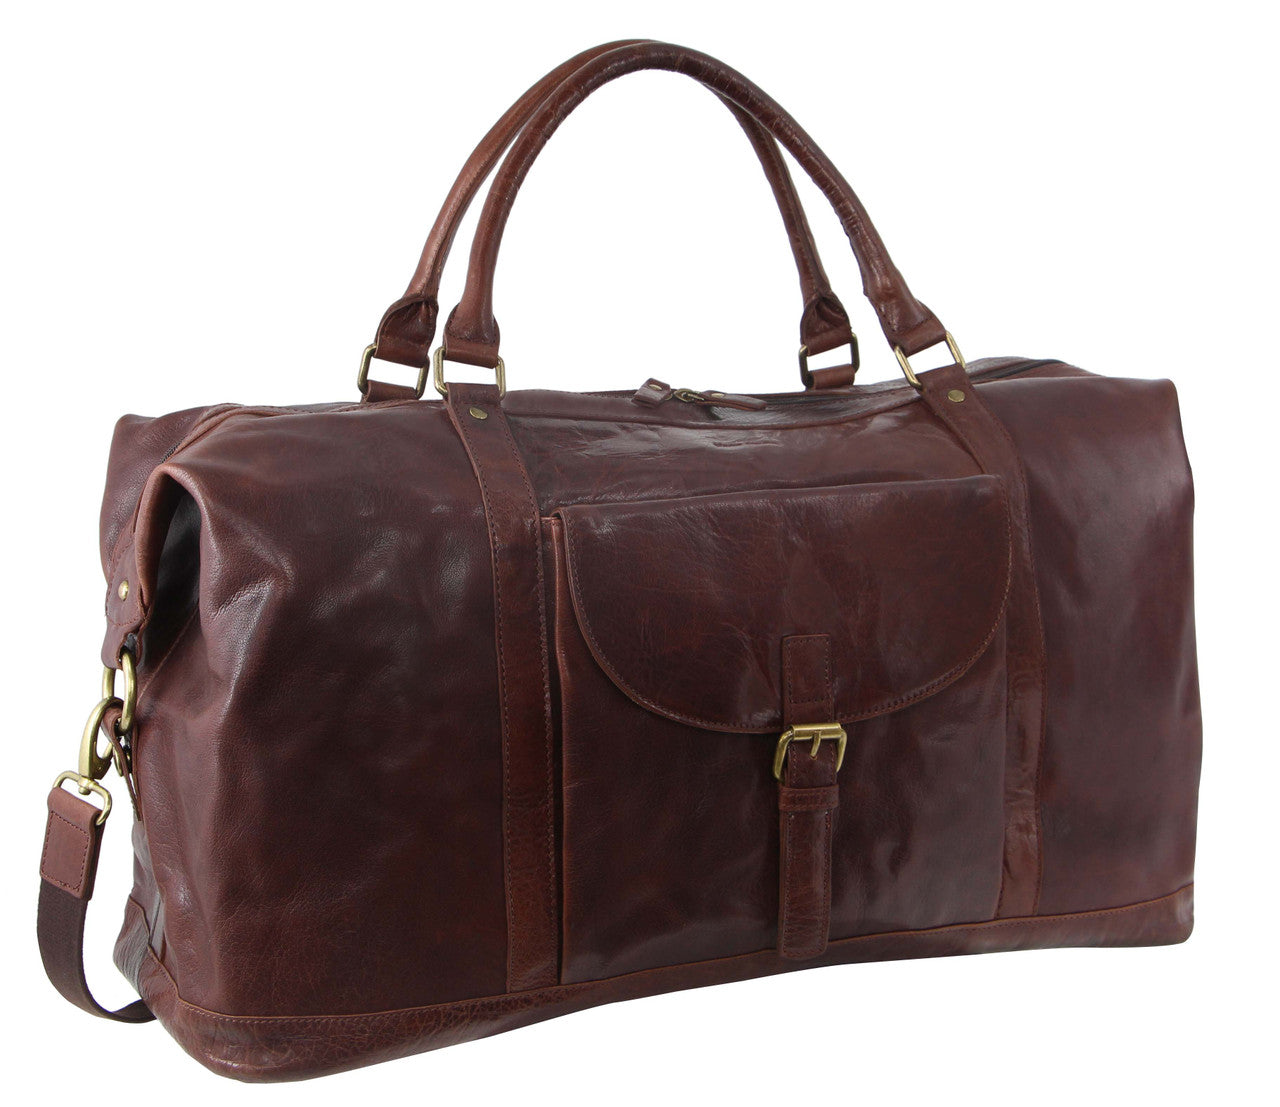 Pierre Cardin Rustic Leather Overnight Bag with front flap pocket PC3134 Chesnut